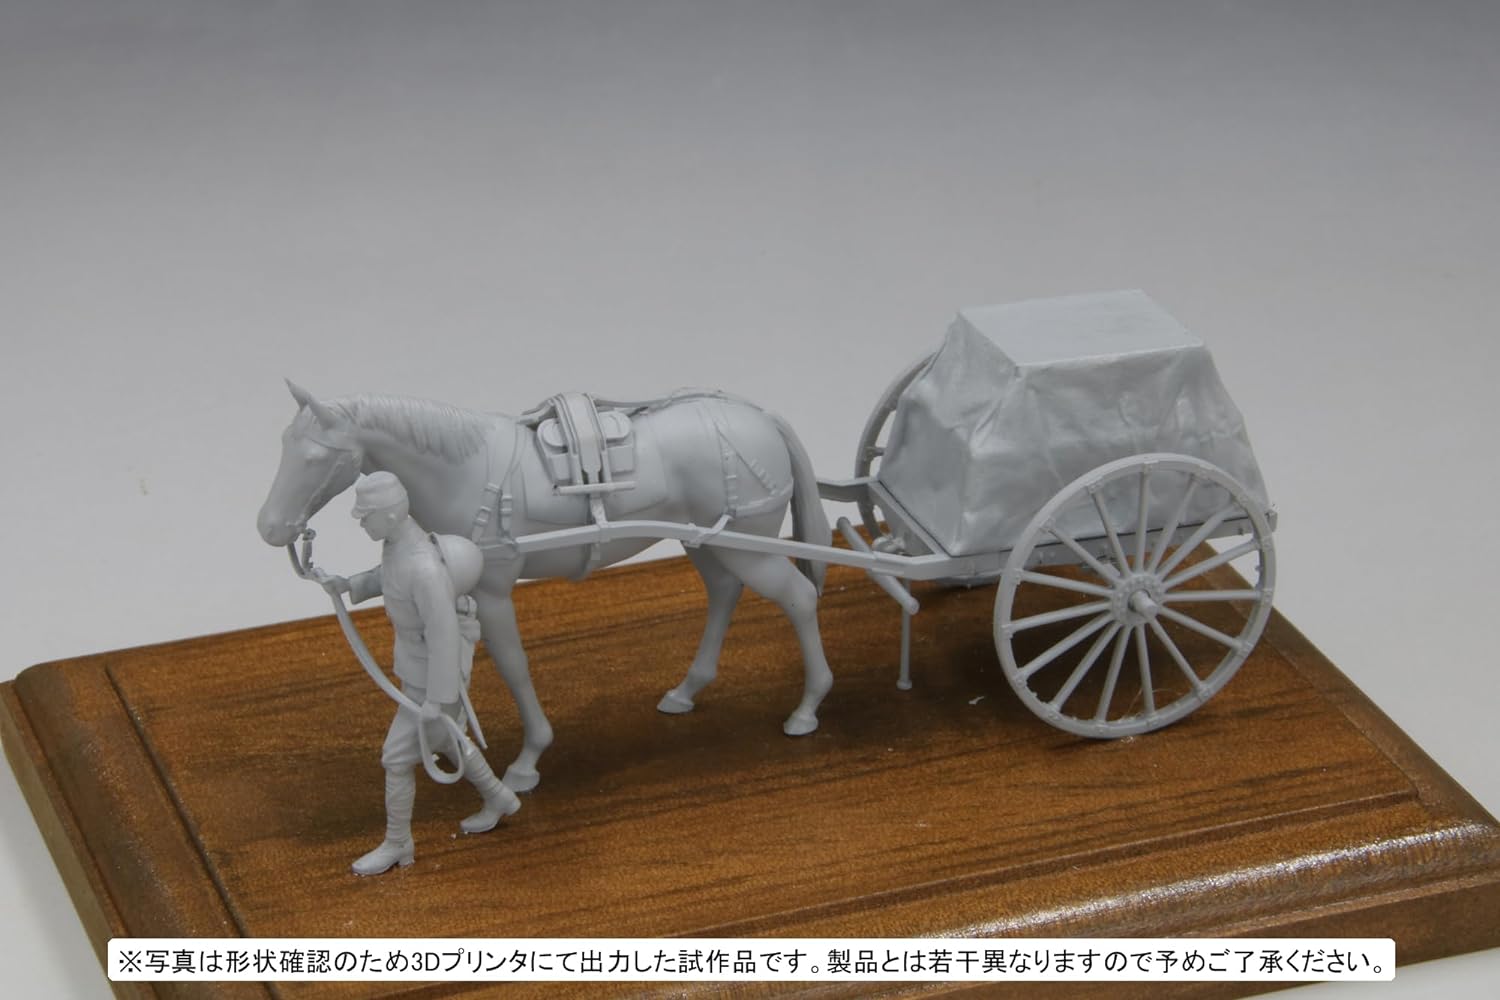 Fine Mold FM60 1/35 Military Series Imperial Army Warhorse Transportation Set of 39 Heavy Vehicles Instep - BanzaiHobby